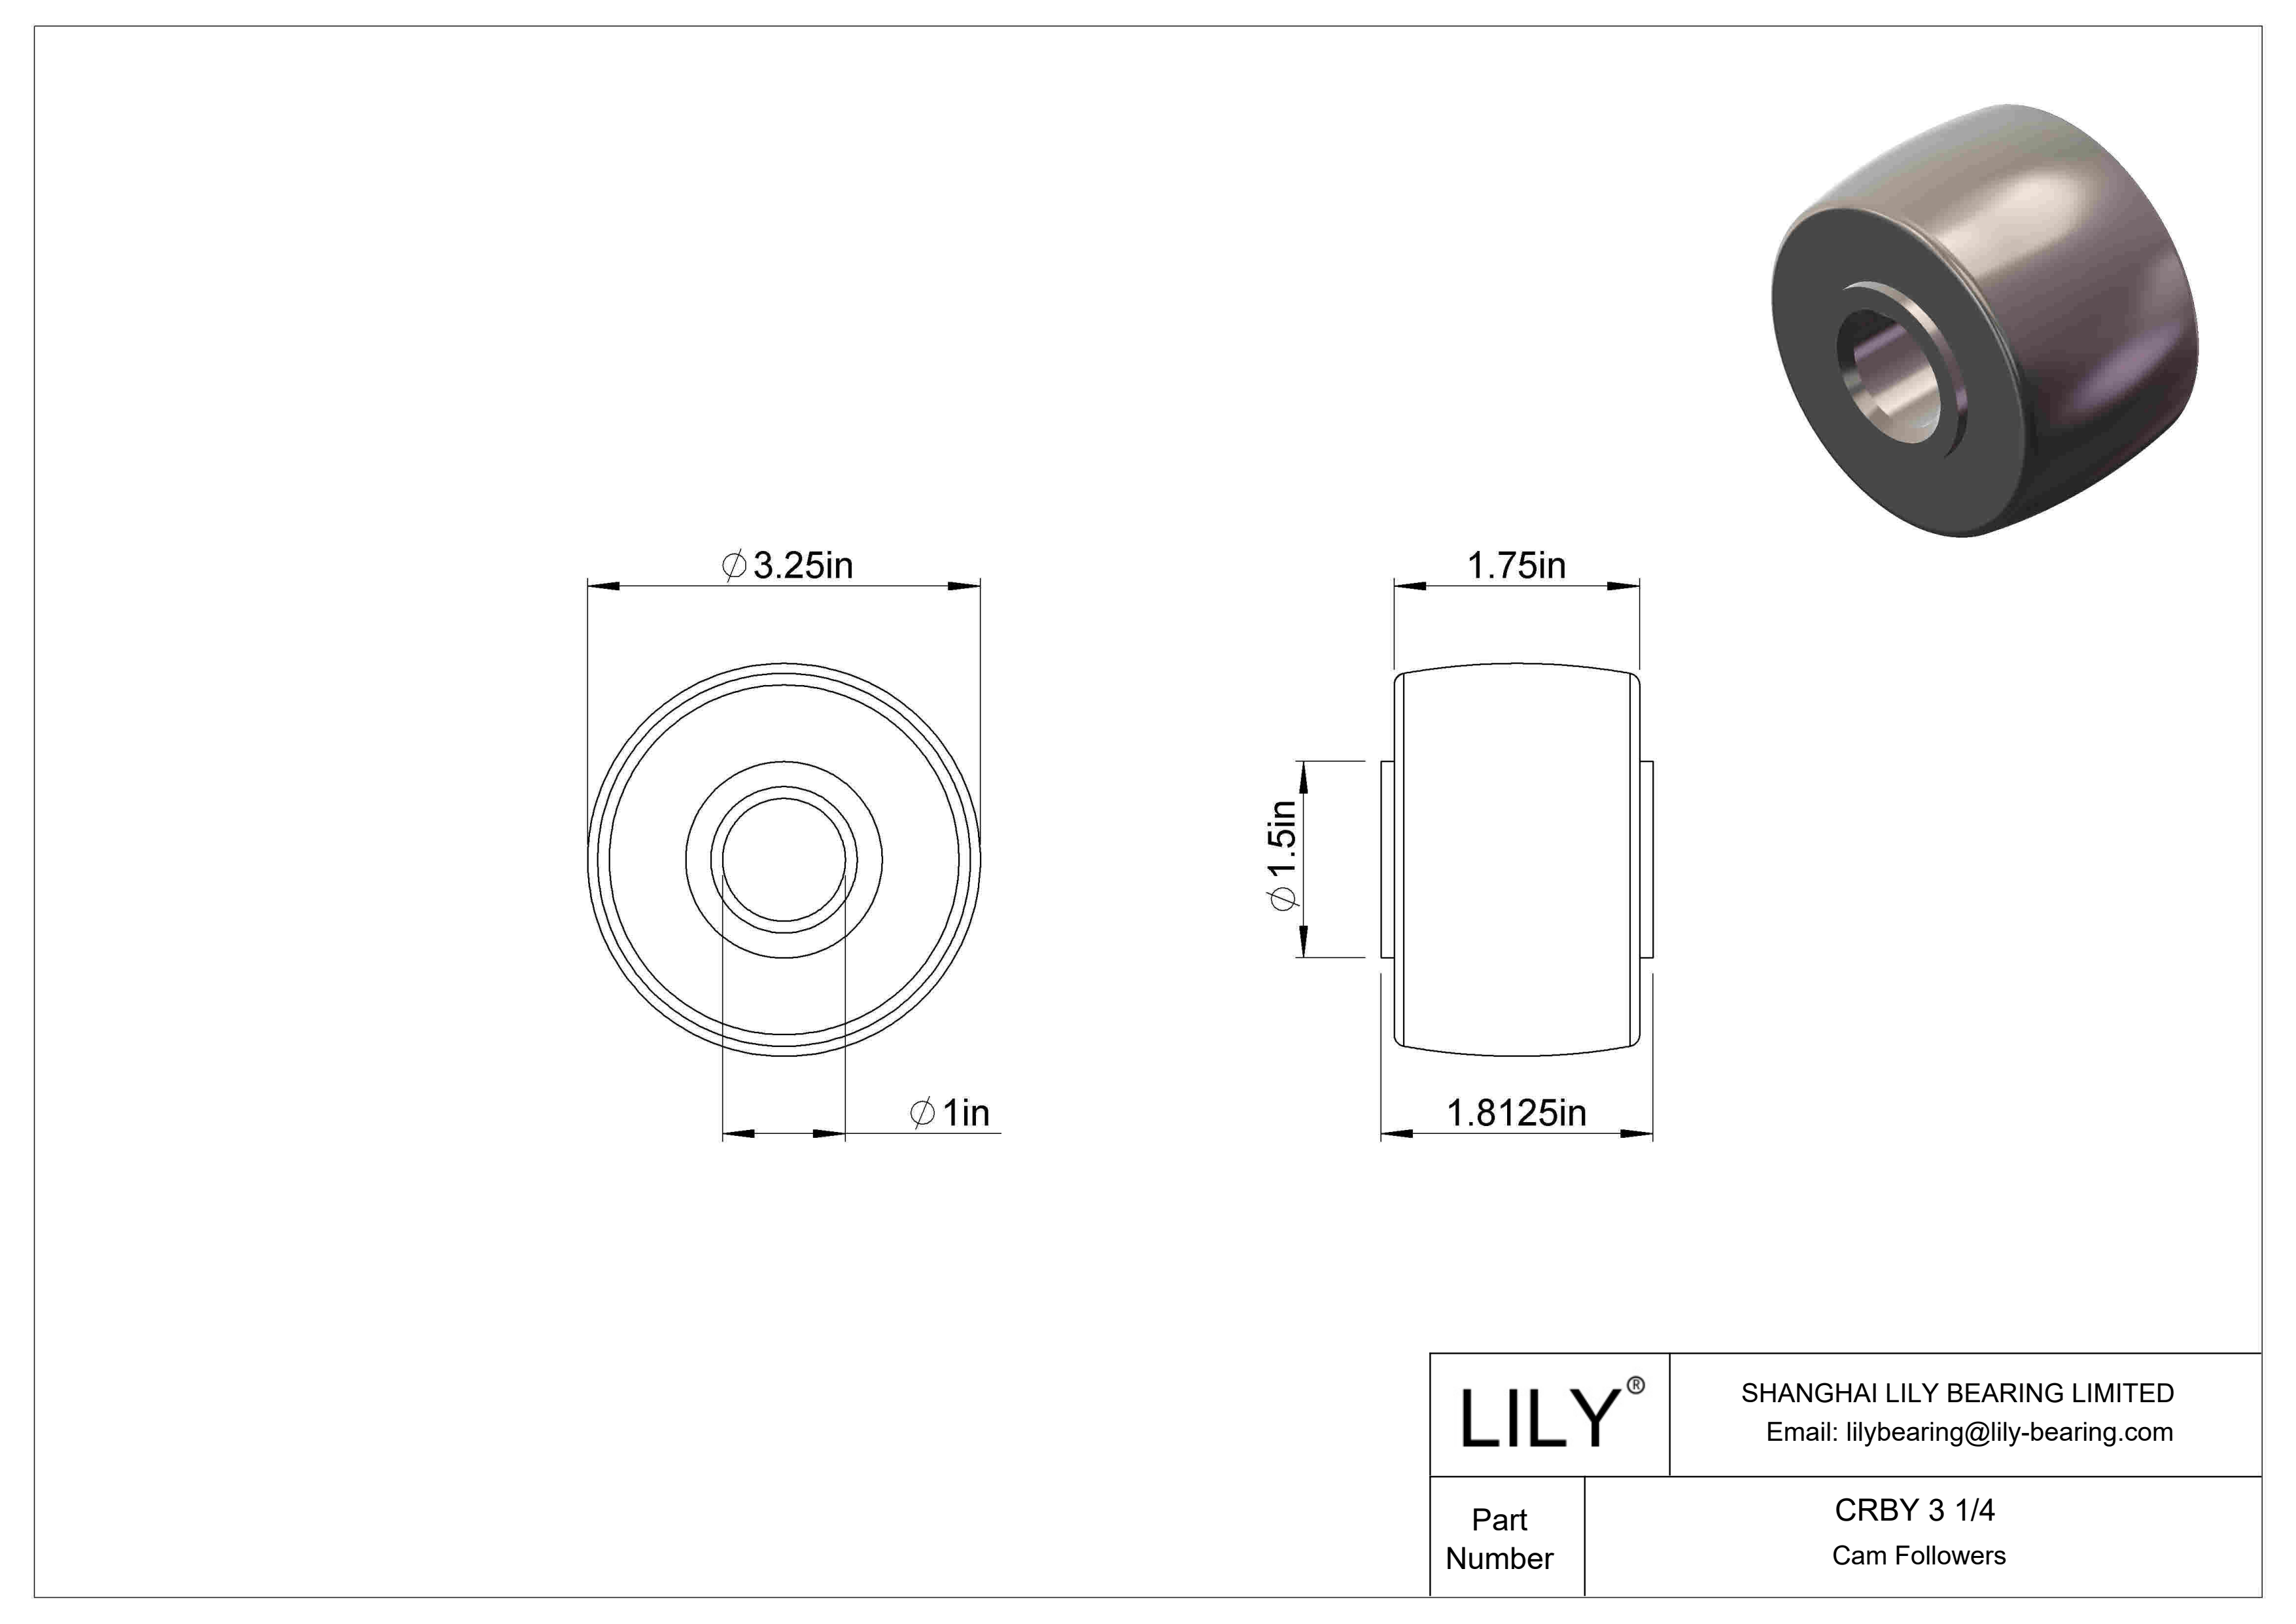 CRBY 3 1/4 Roller Cam Follower-Yoke Type cad drawing